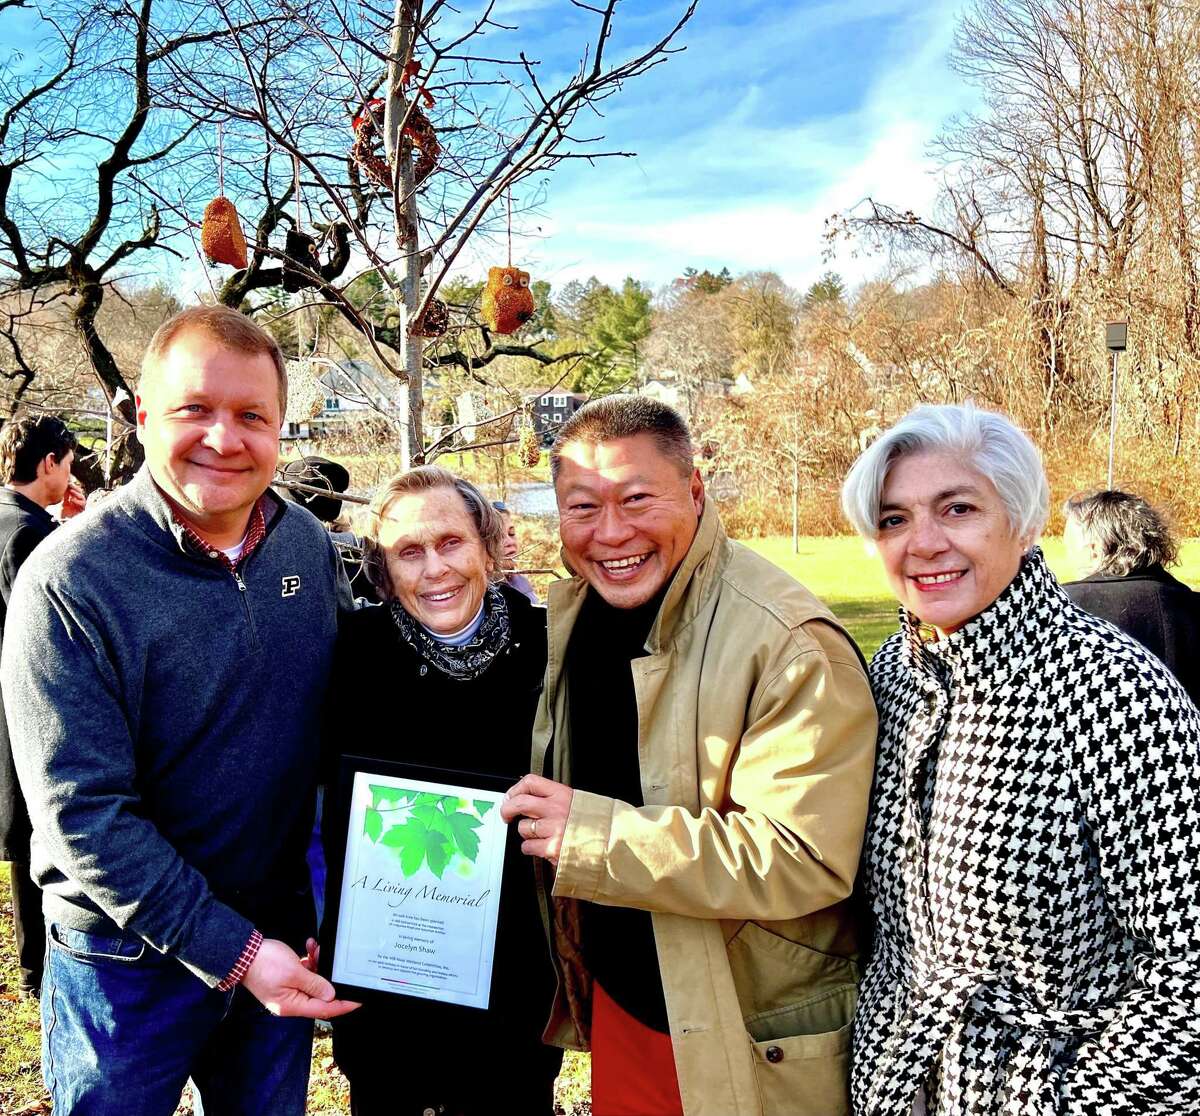 Jon Dilley, the president of the Mill River Wetland Committee; Joy Shaw; state Sen. Tony Hwang (R-28) and Mary Hogue, MRWC board member, at a dedication ceremony in which a tree was planted in honor of Shaw and her work creating the MRWC and it’s educational program Riverlab. The group stands in front of a chestnut oak planted as a living memorial.